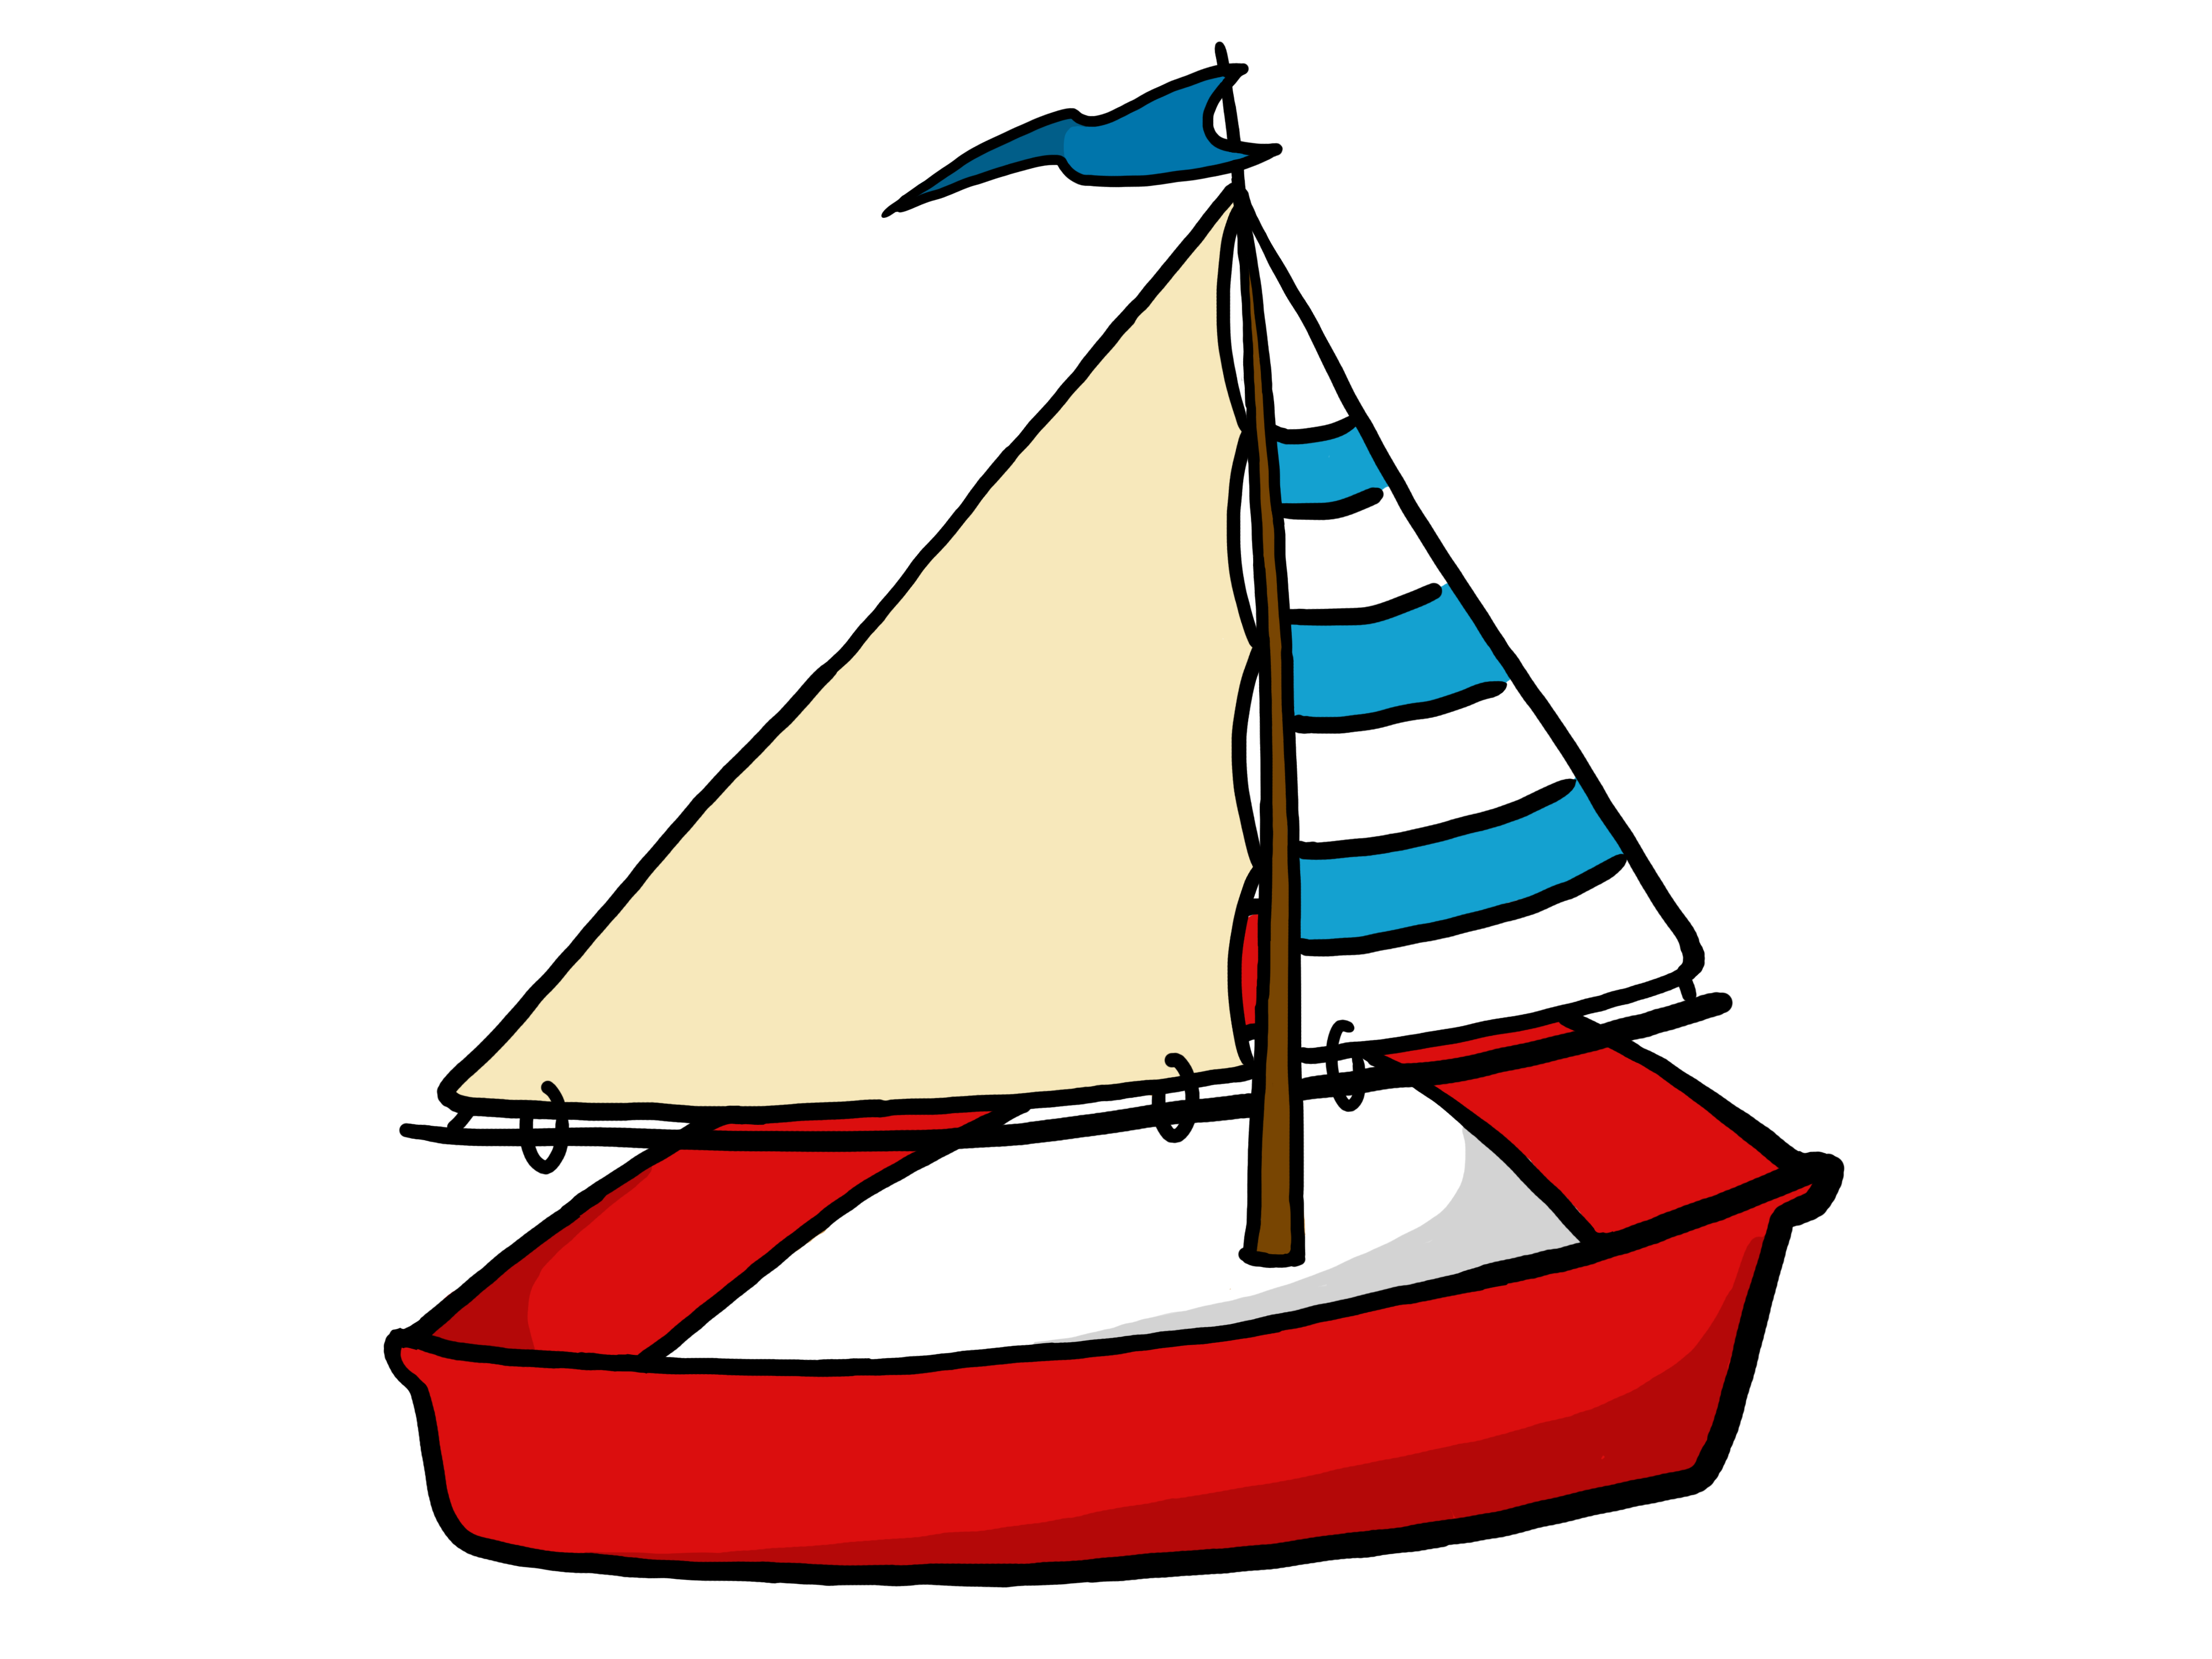 Boating clipart free clipart images